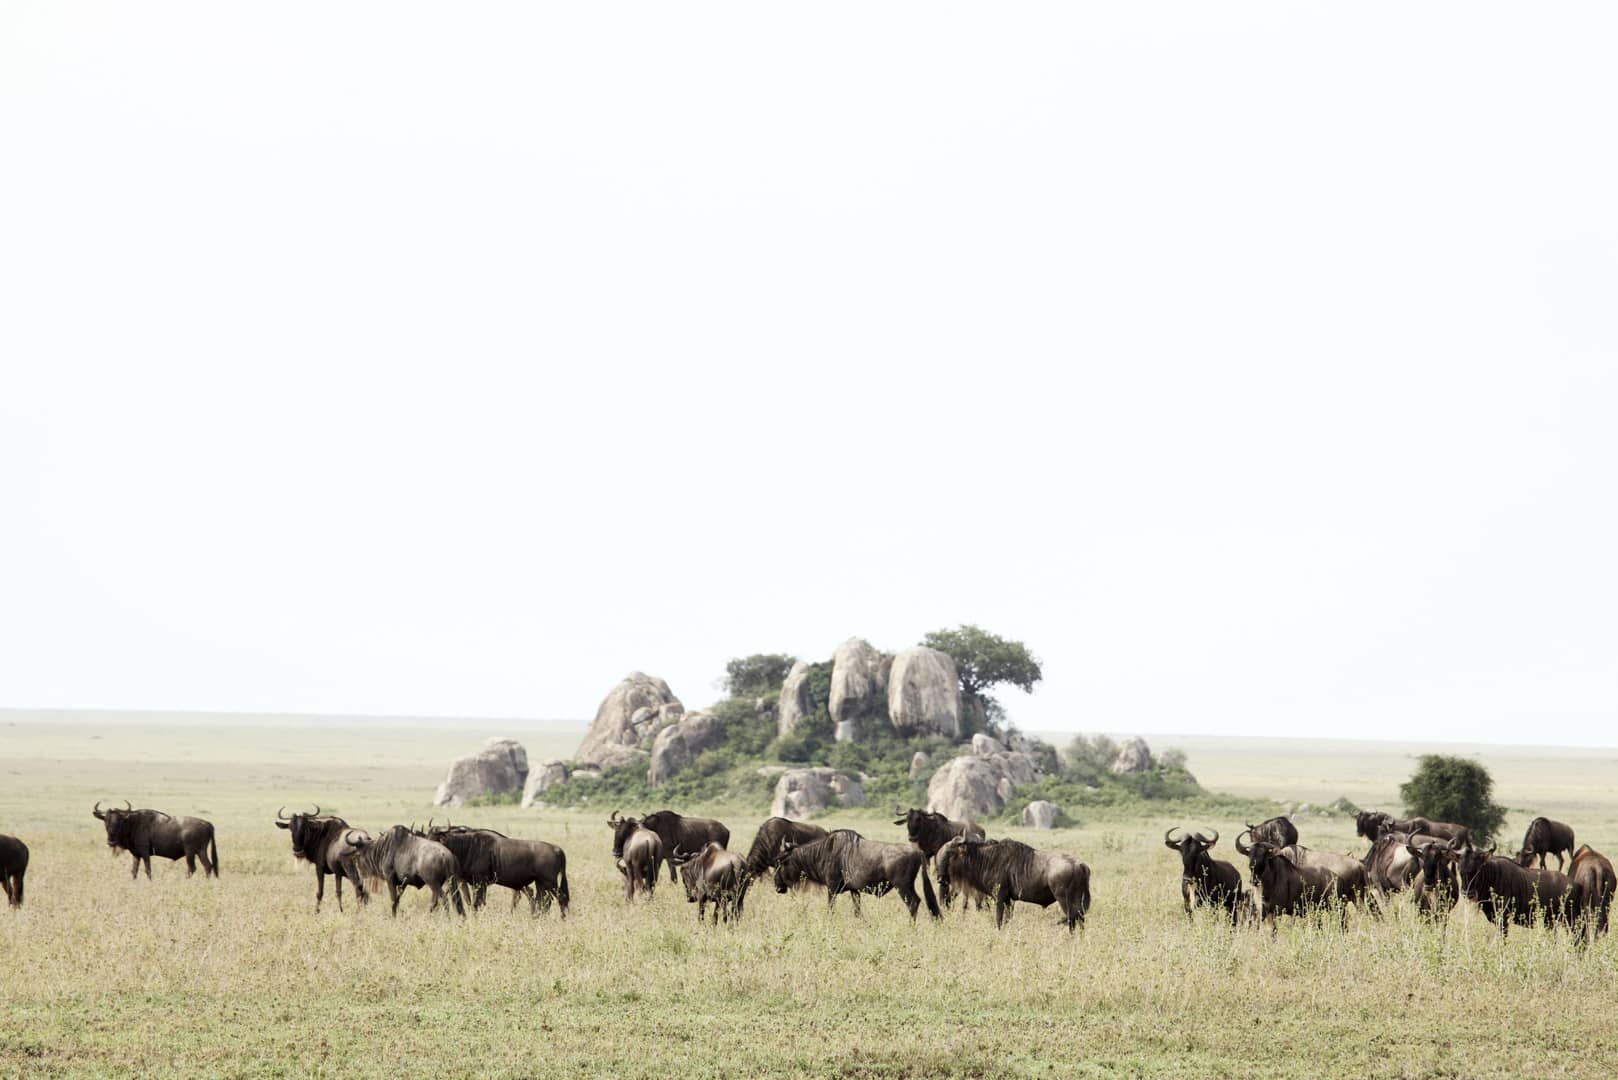 A herd of wildebeest passing by Dunia Camp.